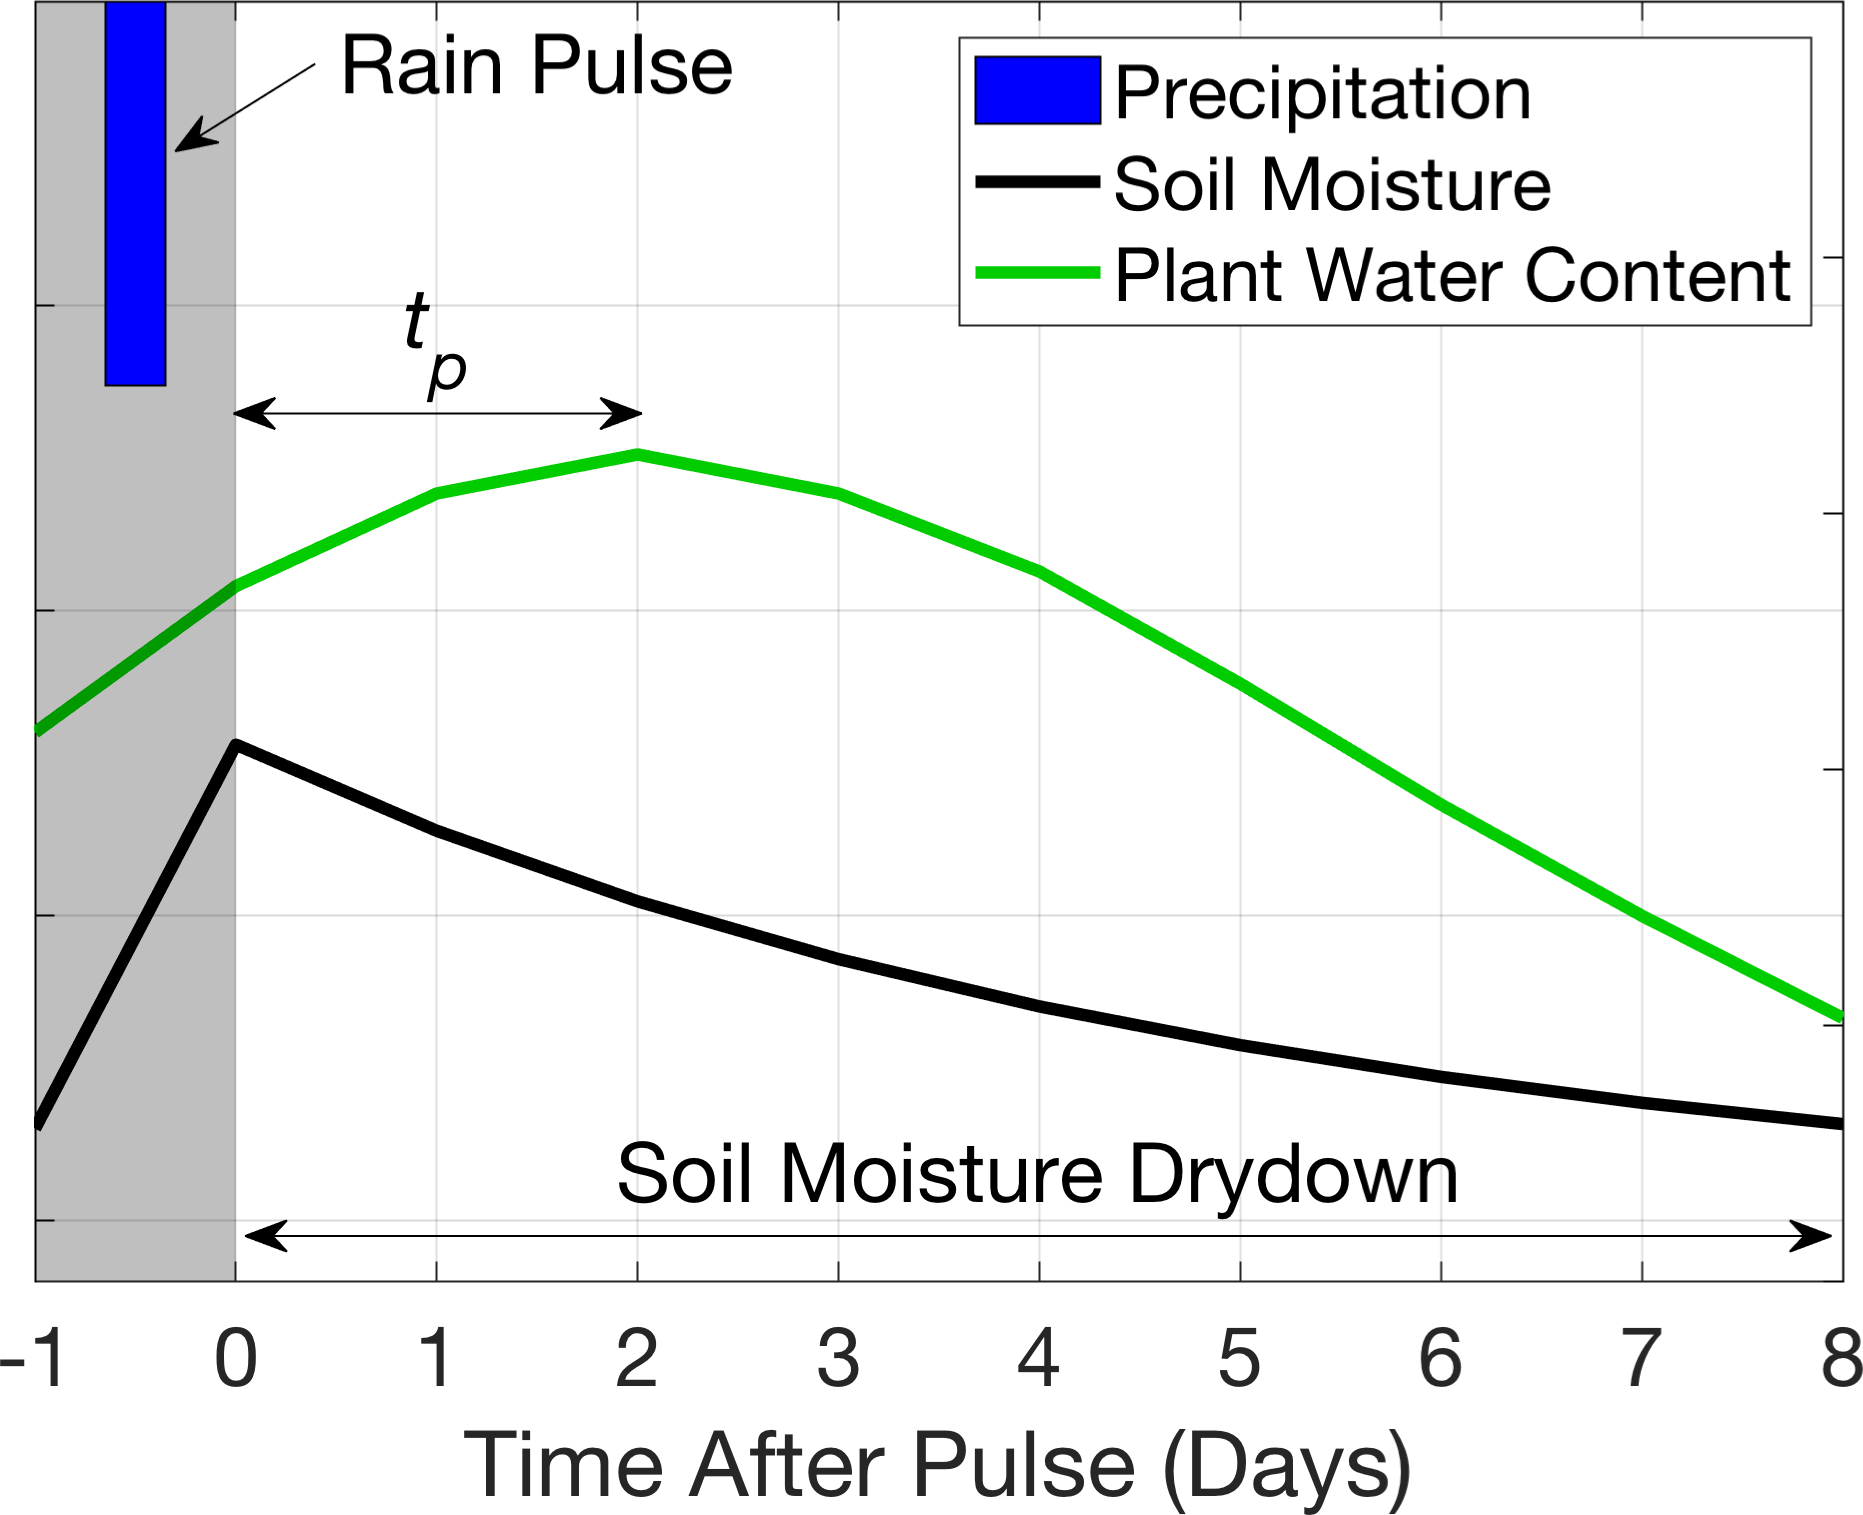 Bg Patterns Of Plant Rehydration And Growth Following Pulses Of Soil Moisture Availability